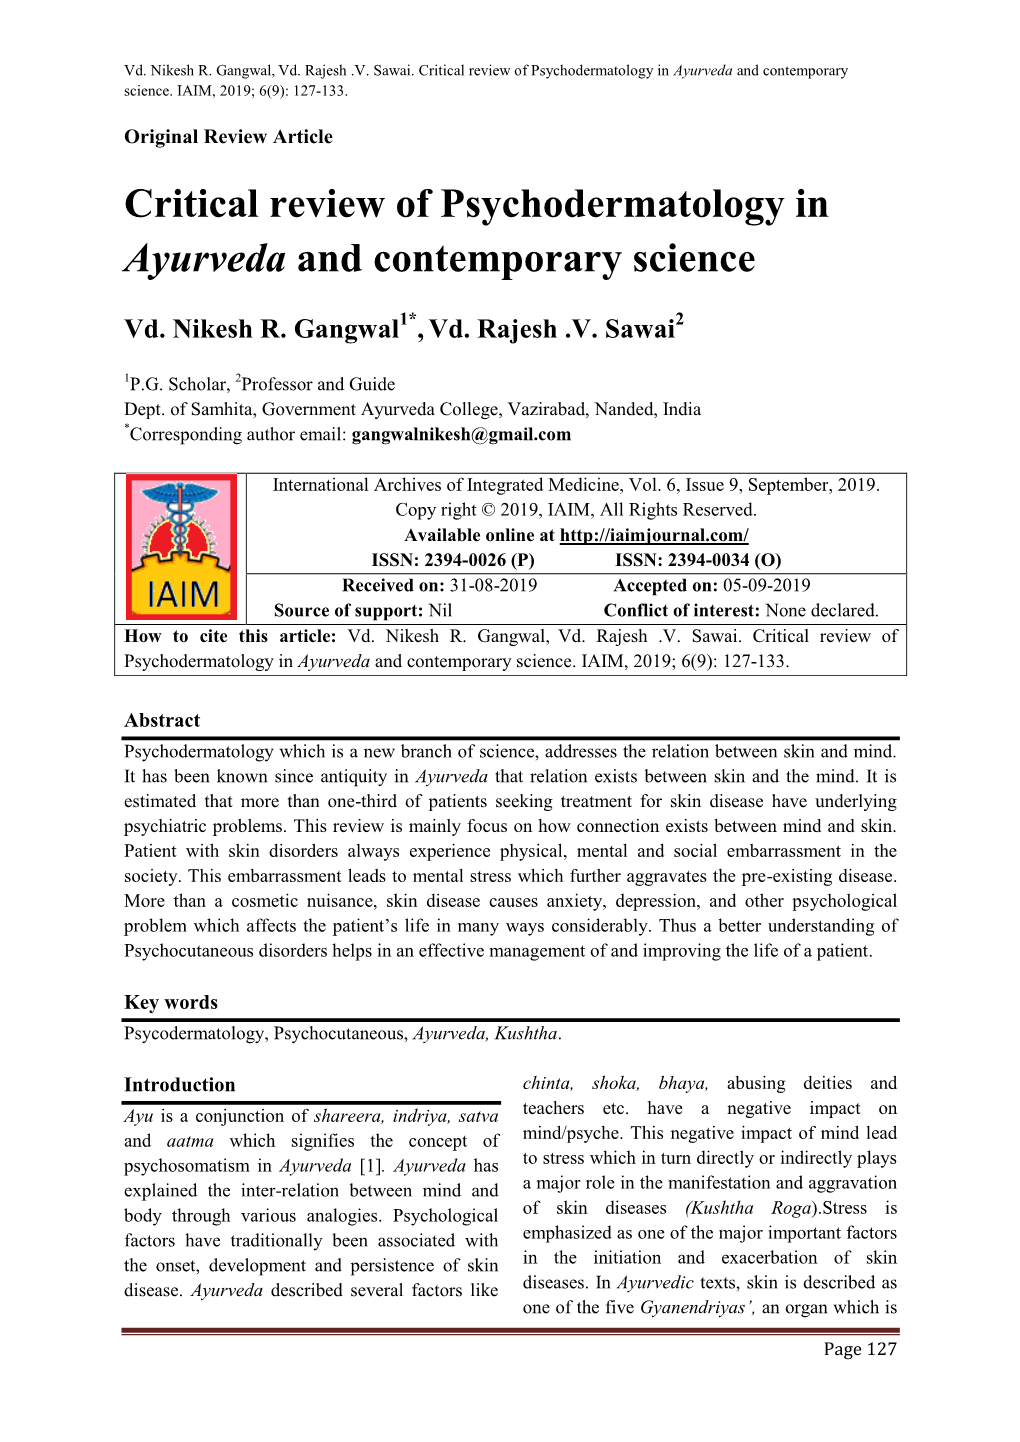 Critical Review of Psychodermatology in Ayurveda and Contemporary Science